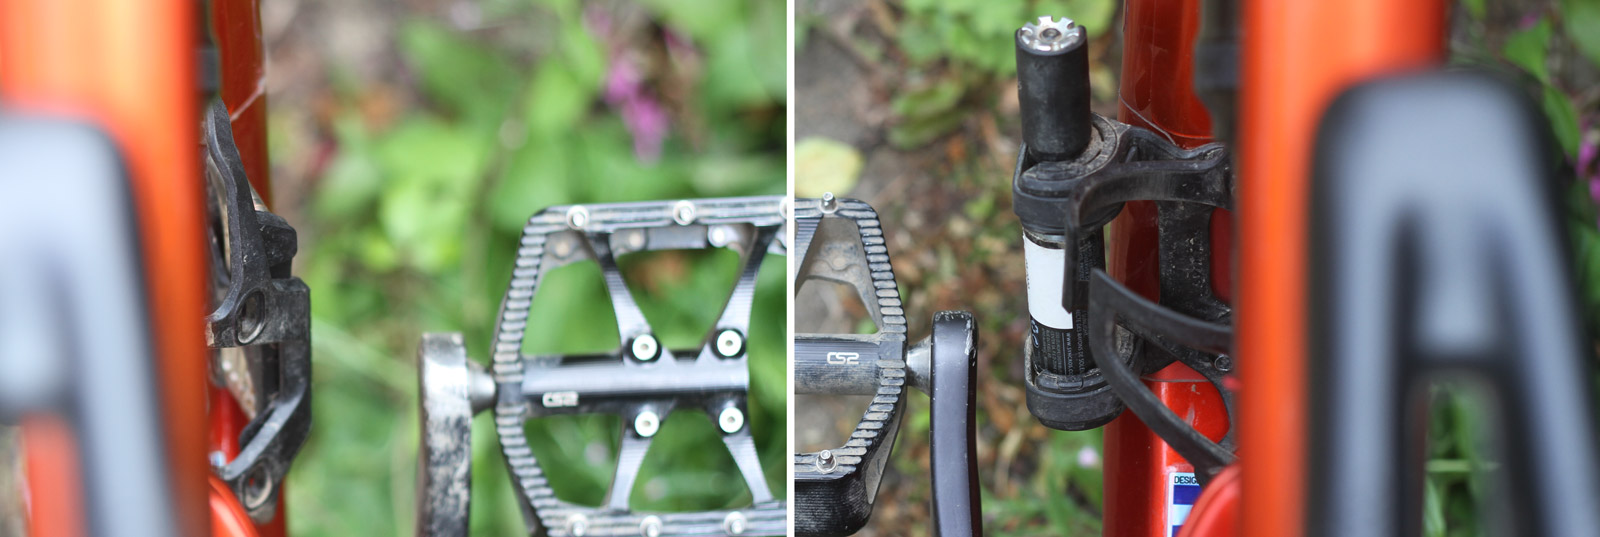 syncros is tailor cage review clearance of pedal and cranks